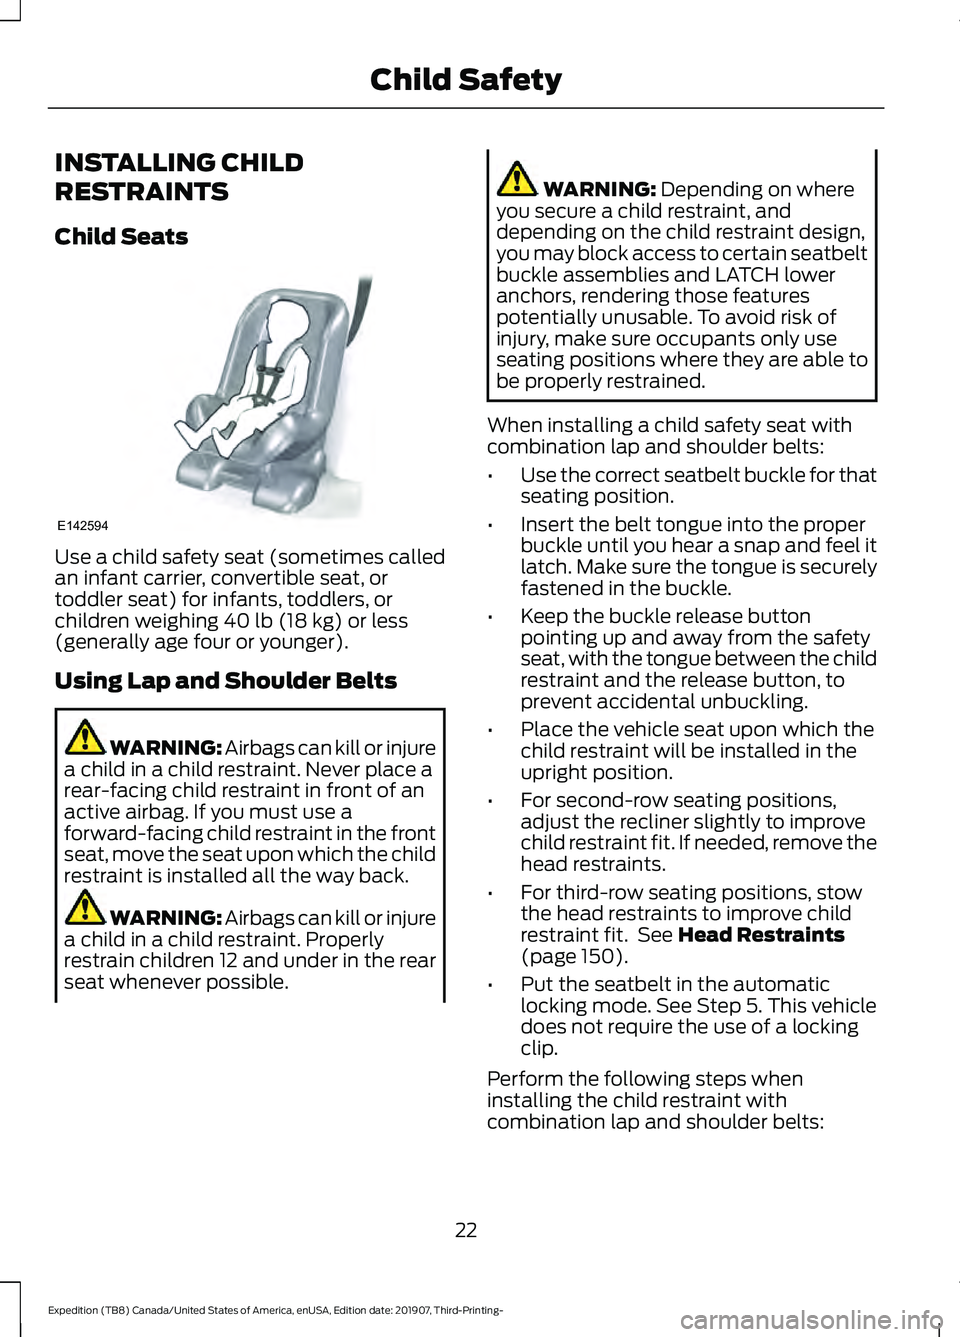 FORD EXPEDITION 2020  Owners Manual INSTALLING CHILD
RESTRAINTS
Child Seats
Use a child safety seat (sometimes called
an infant carrier, convertible seat, or
toddler seat) for infants, toddlers, or
children weighing 40 lb (18 kg) or les